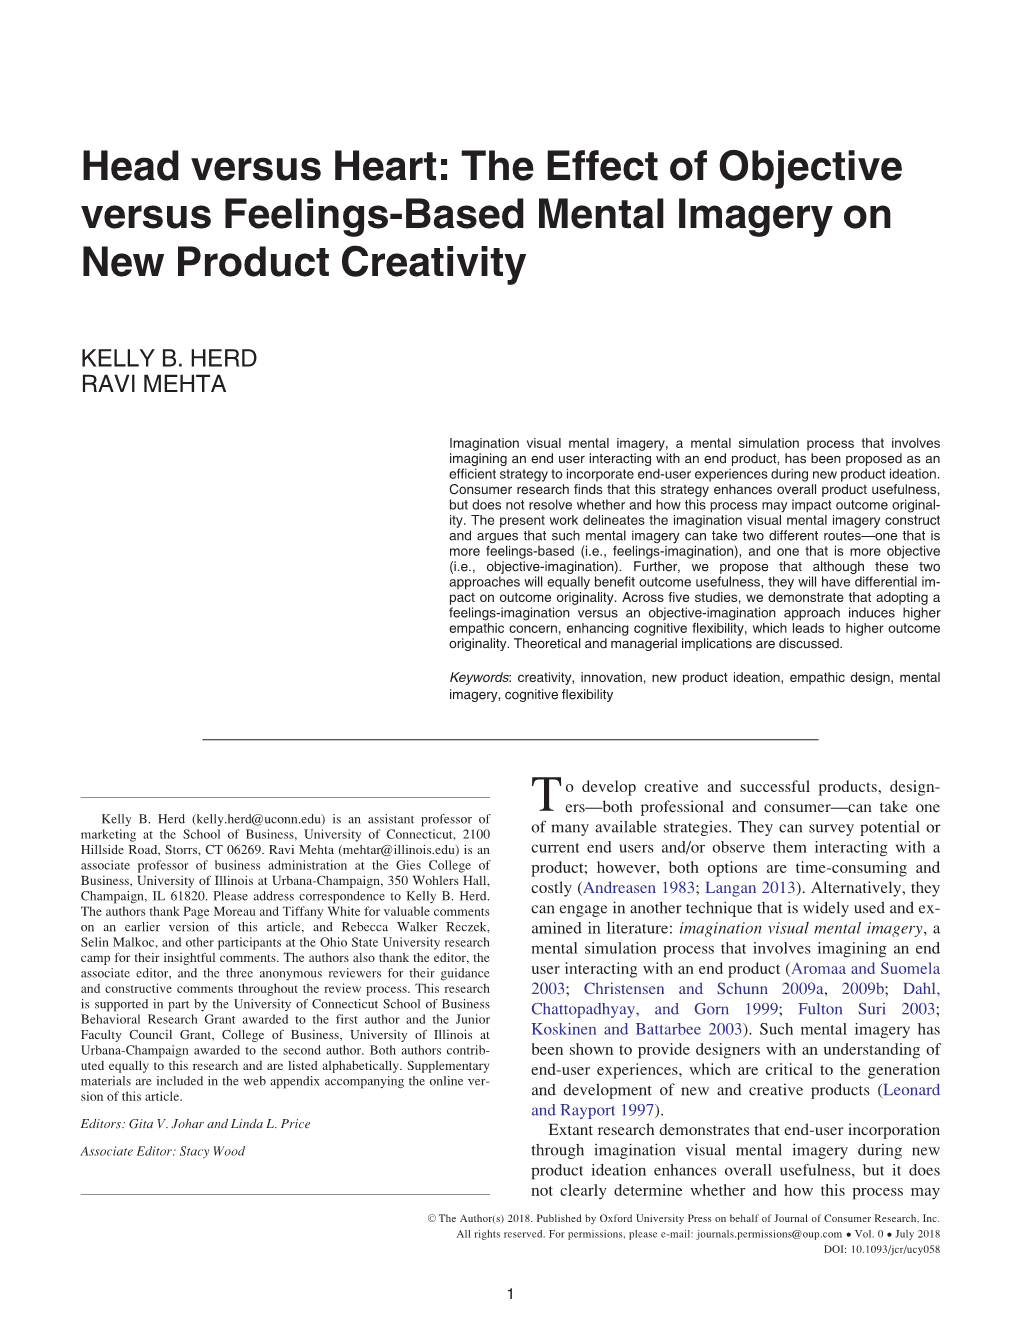 The Effect of Objective Versus Feelings-Based Mental Imagery on New Product Creativity